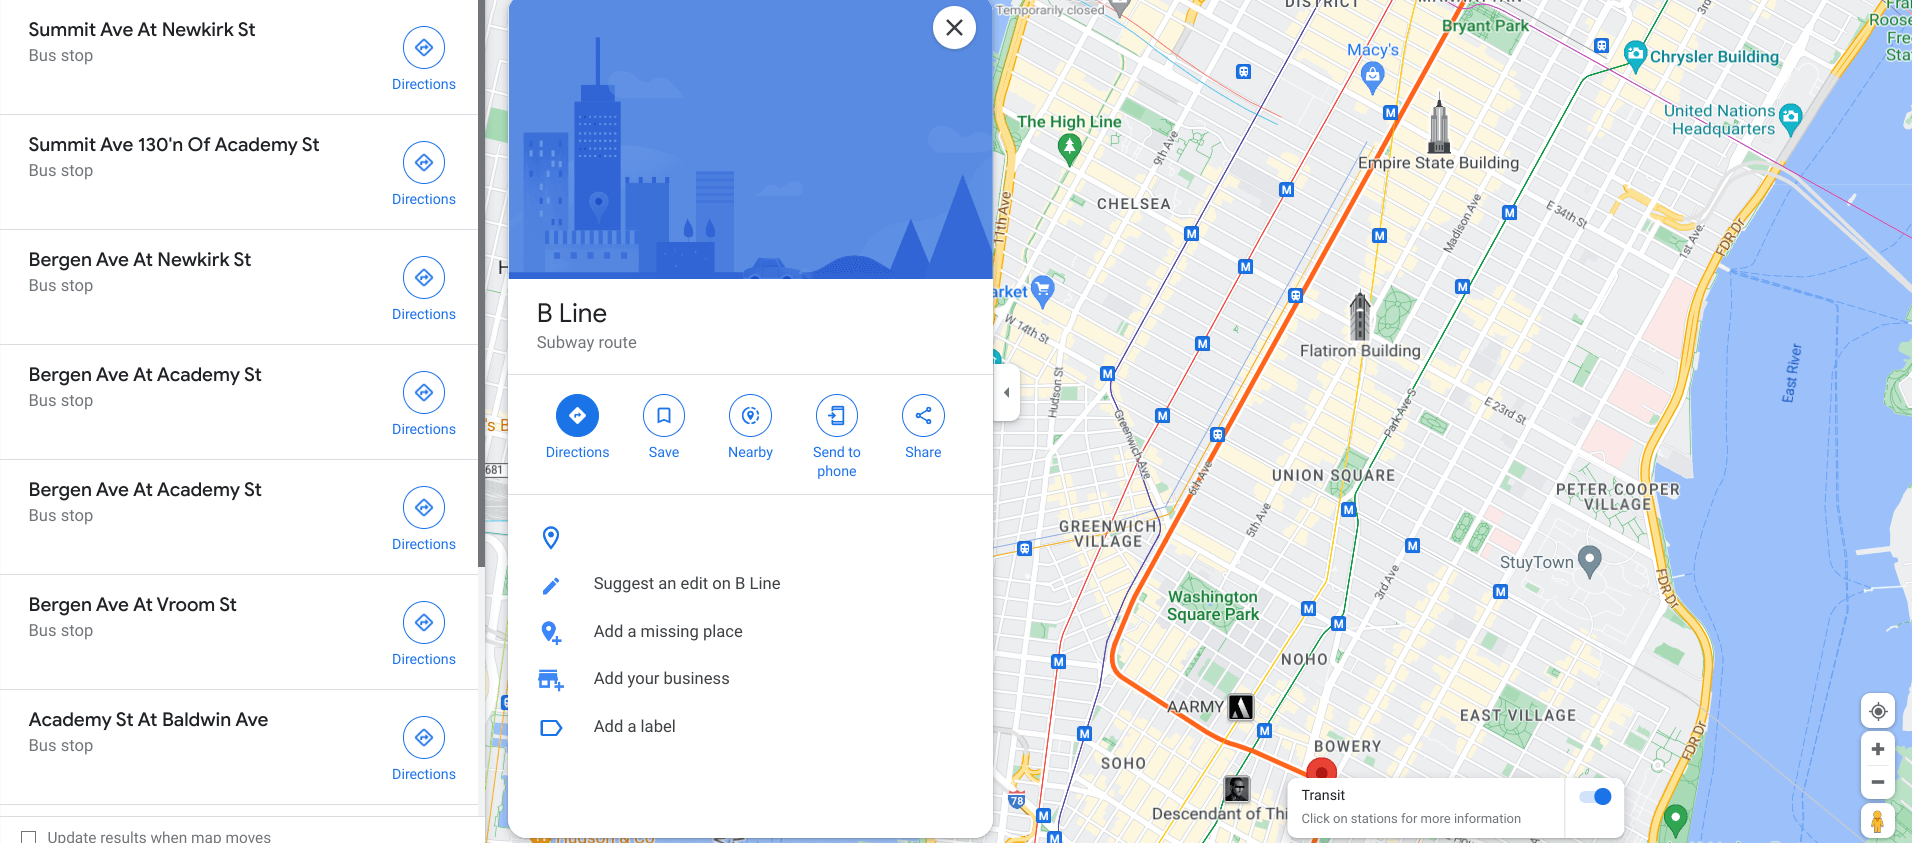 Transit routes in Google Maps